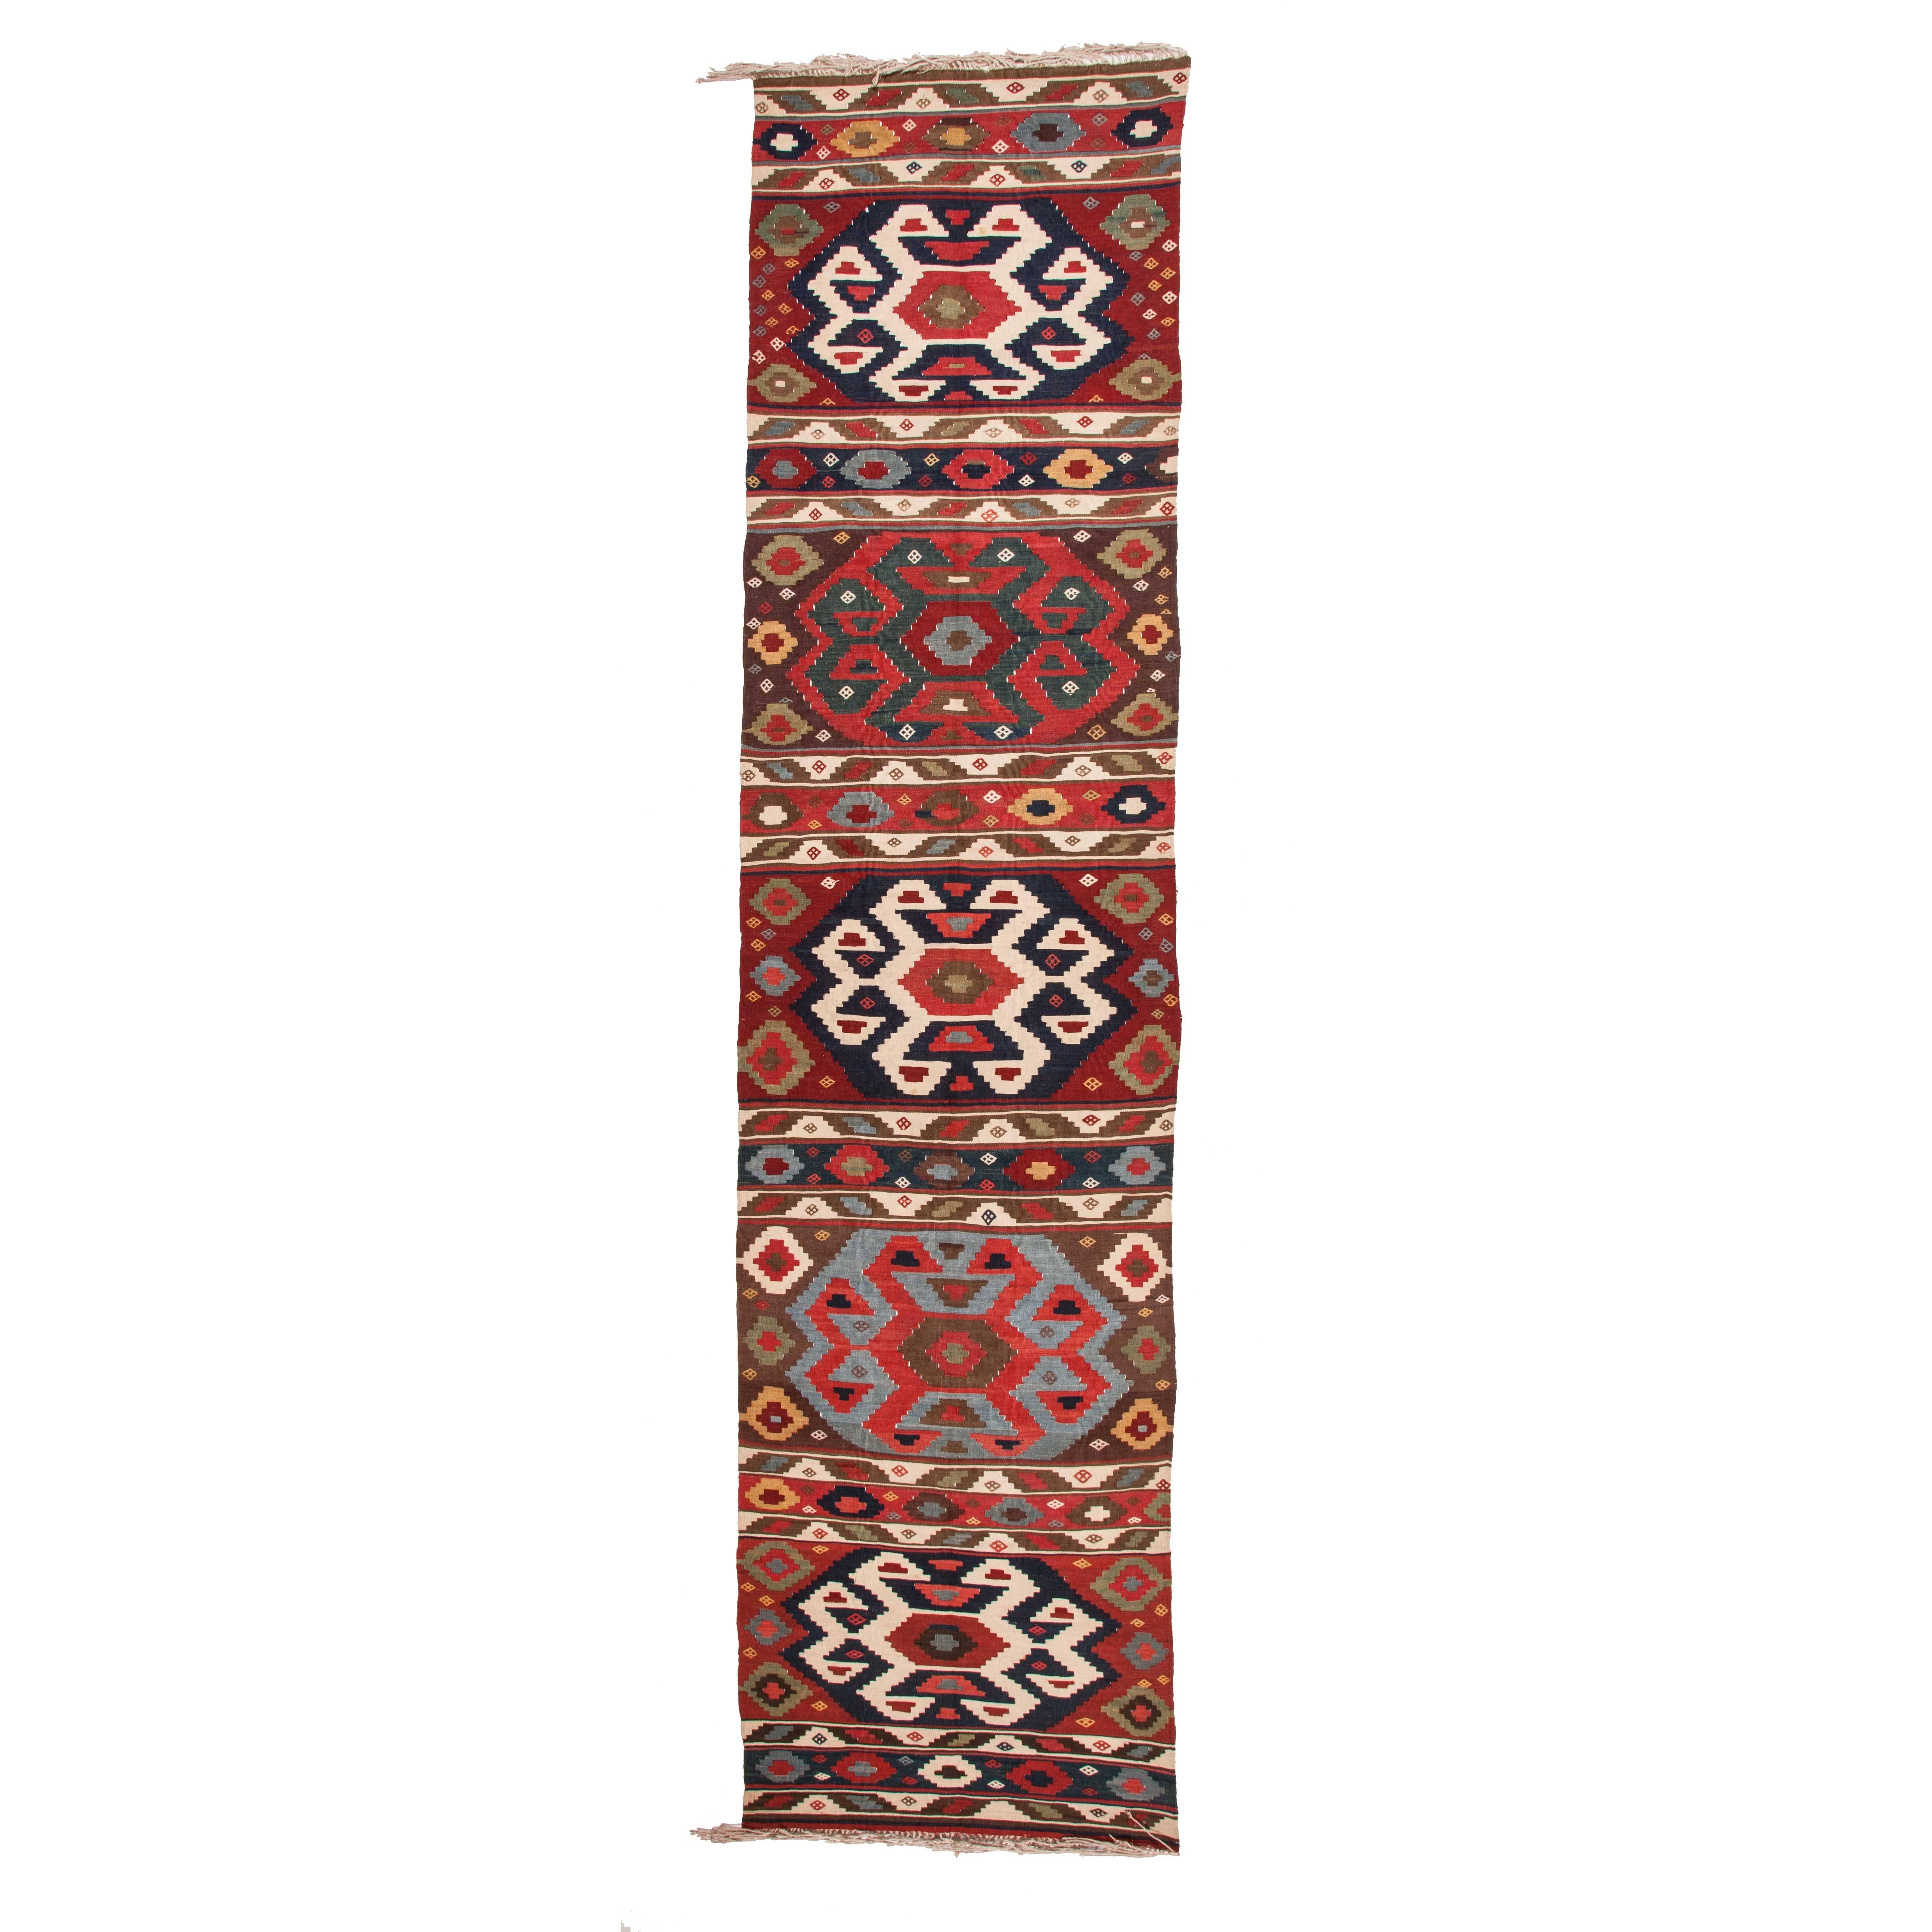 19th Century Antique South Caucasian Kilim with a Very Fine Texture